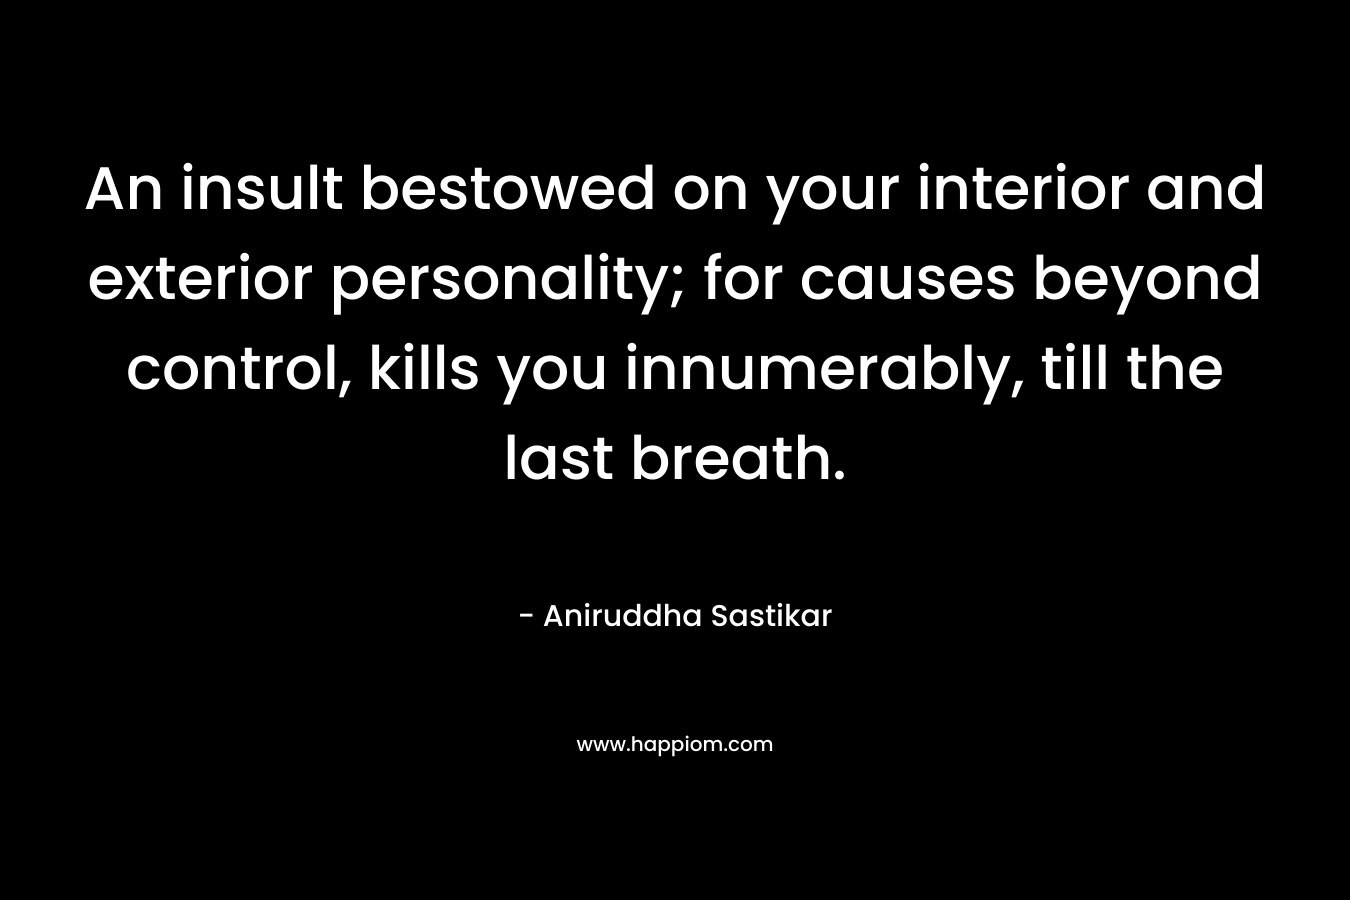 An insult bestowed on your interior and exterior personality; for causes beyond control, kills you innumerably, till the last breath.